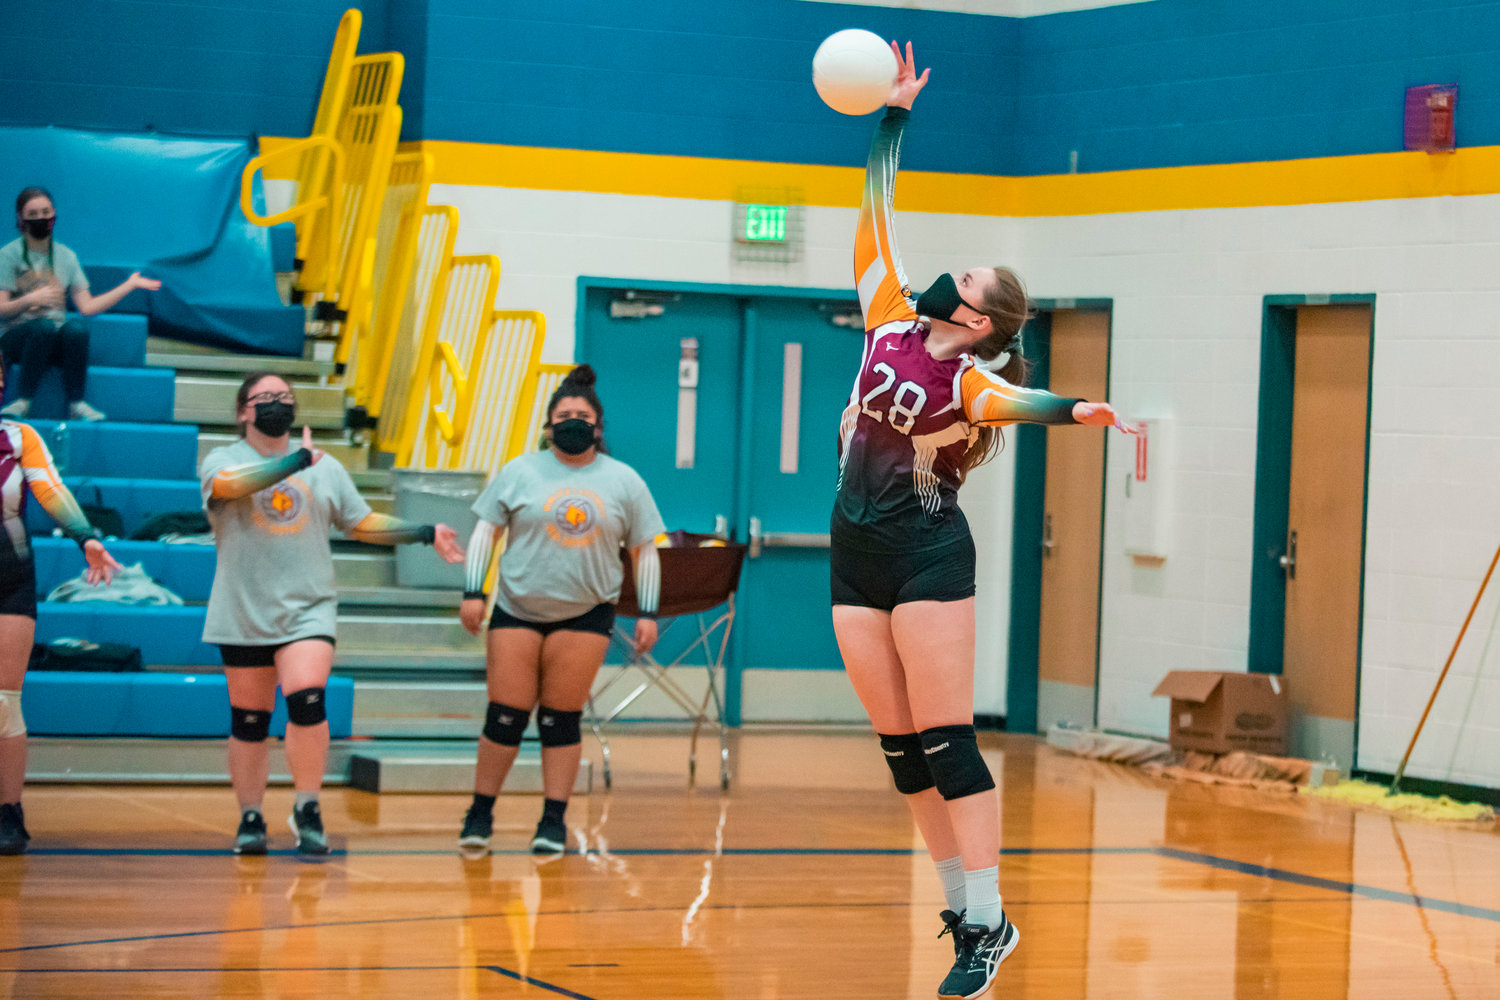 Winlock’s Madison Vigre (28) serves the ball during a game against Adna on Wednesday.